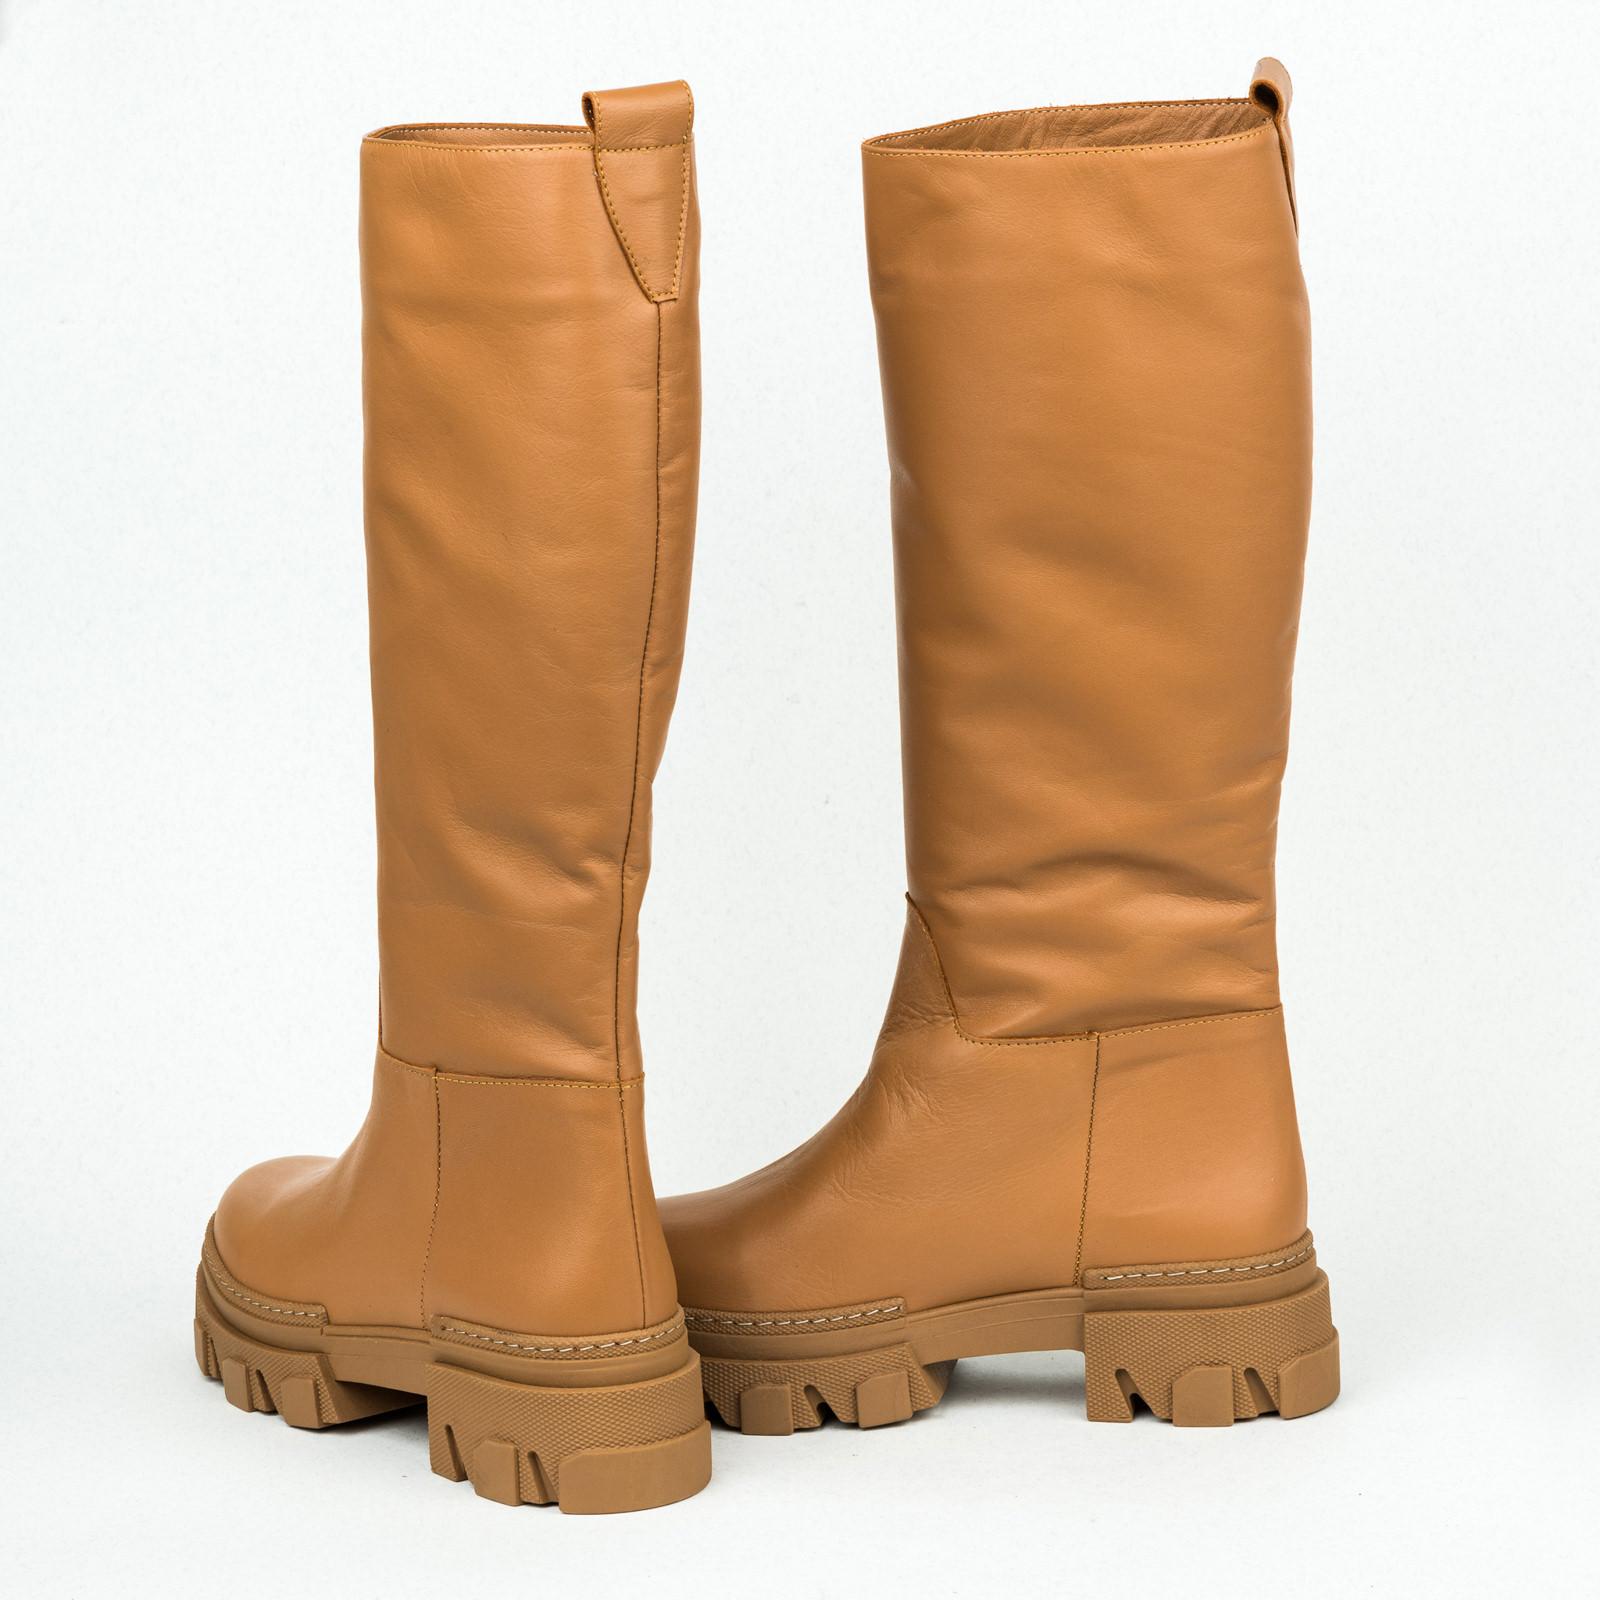 Leather WATERPROOF boots B128 - CAMEL